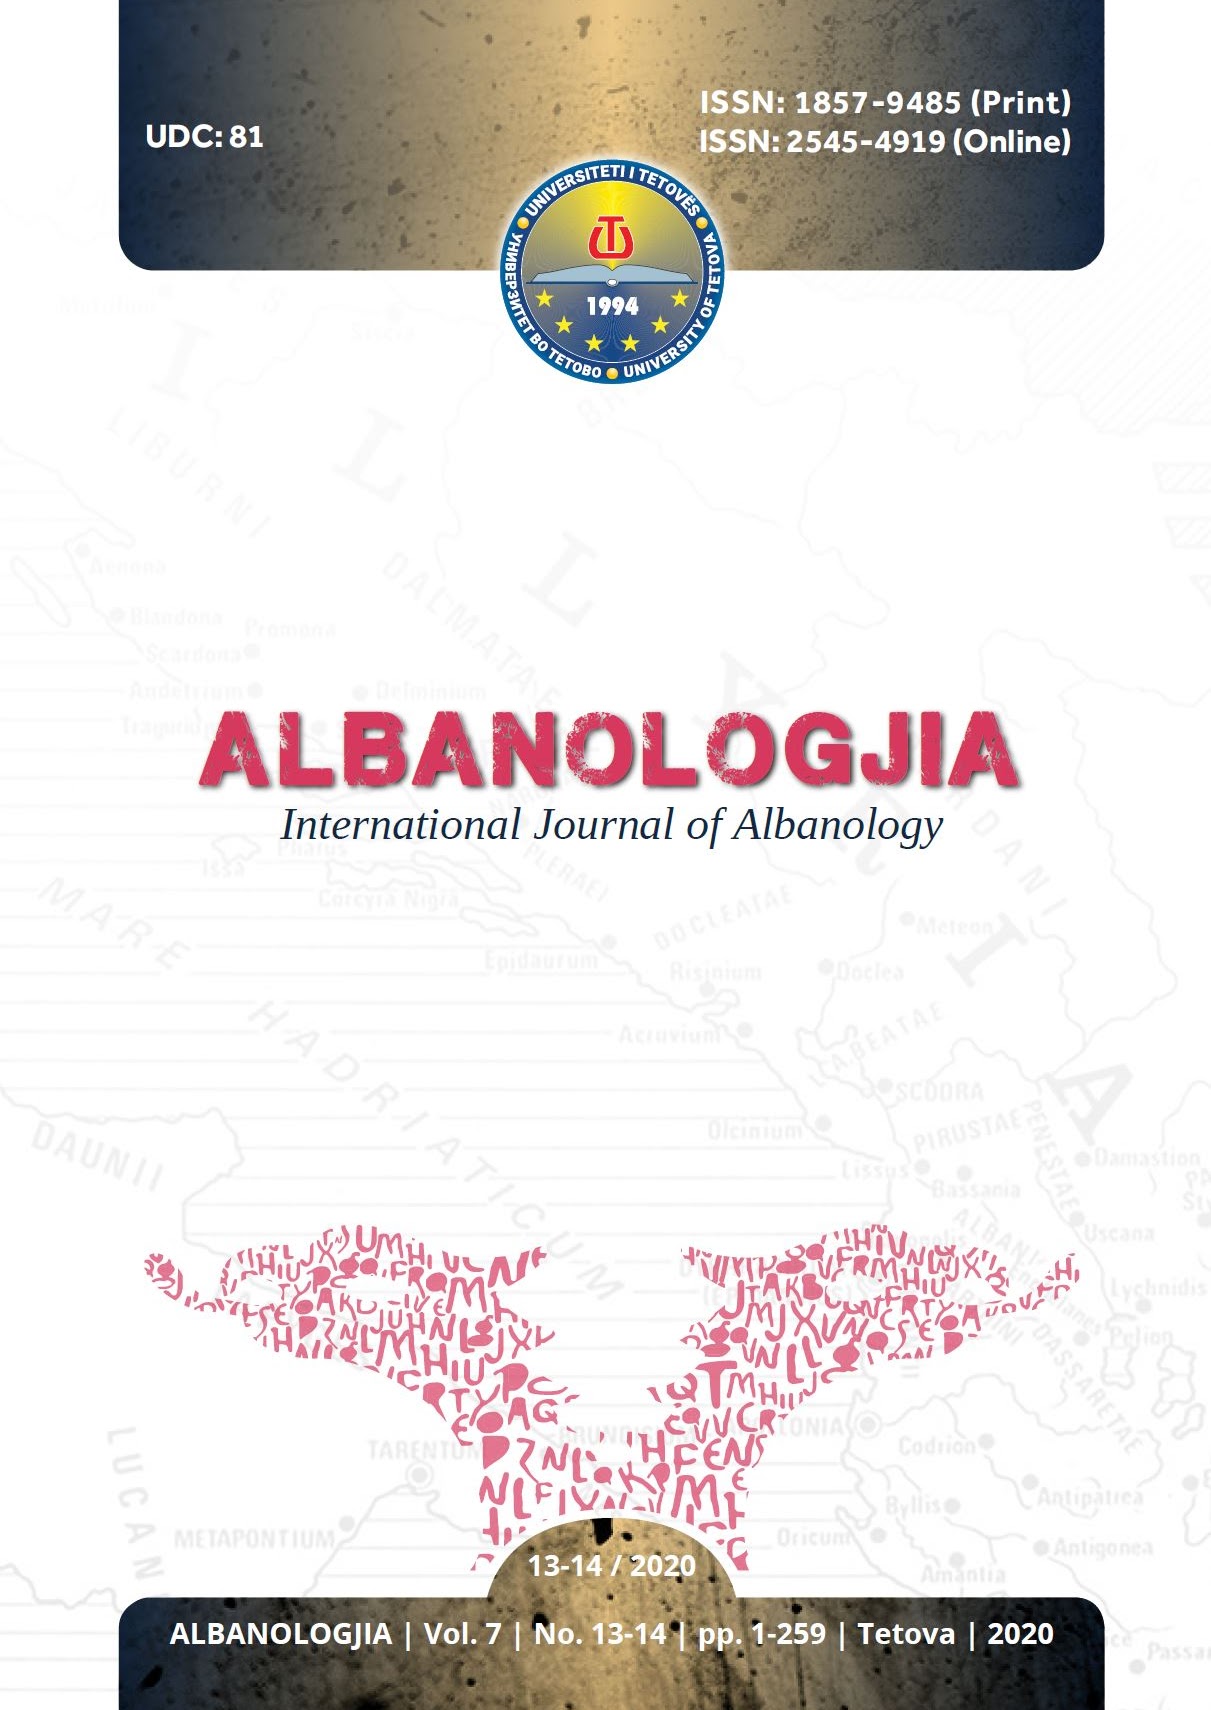 ALBANIAN LANGUAGE SYNTAX (syntactic ingredients) STANDARDS OF ALBANIAN STANDARD Cover Image